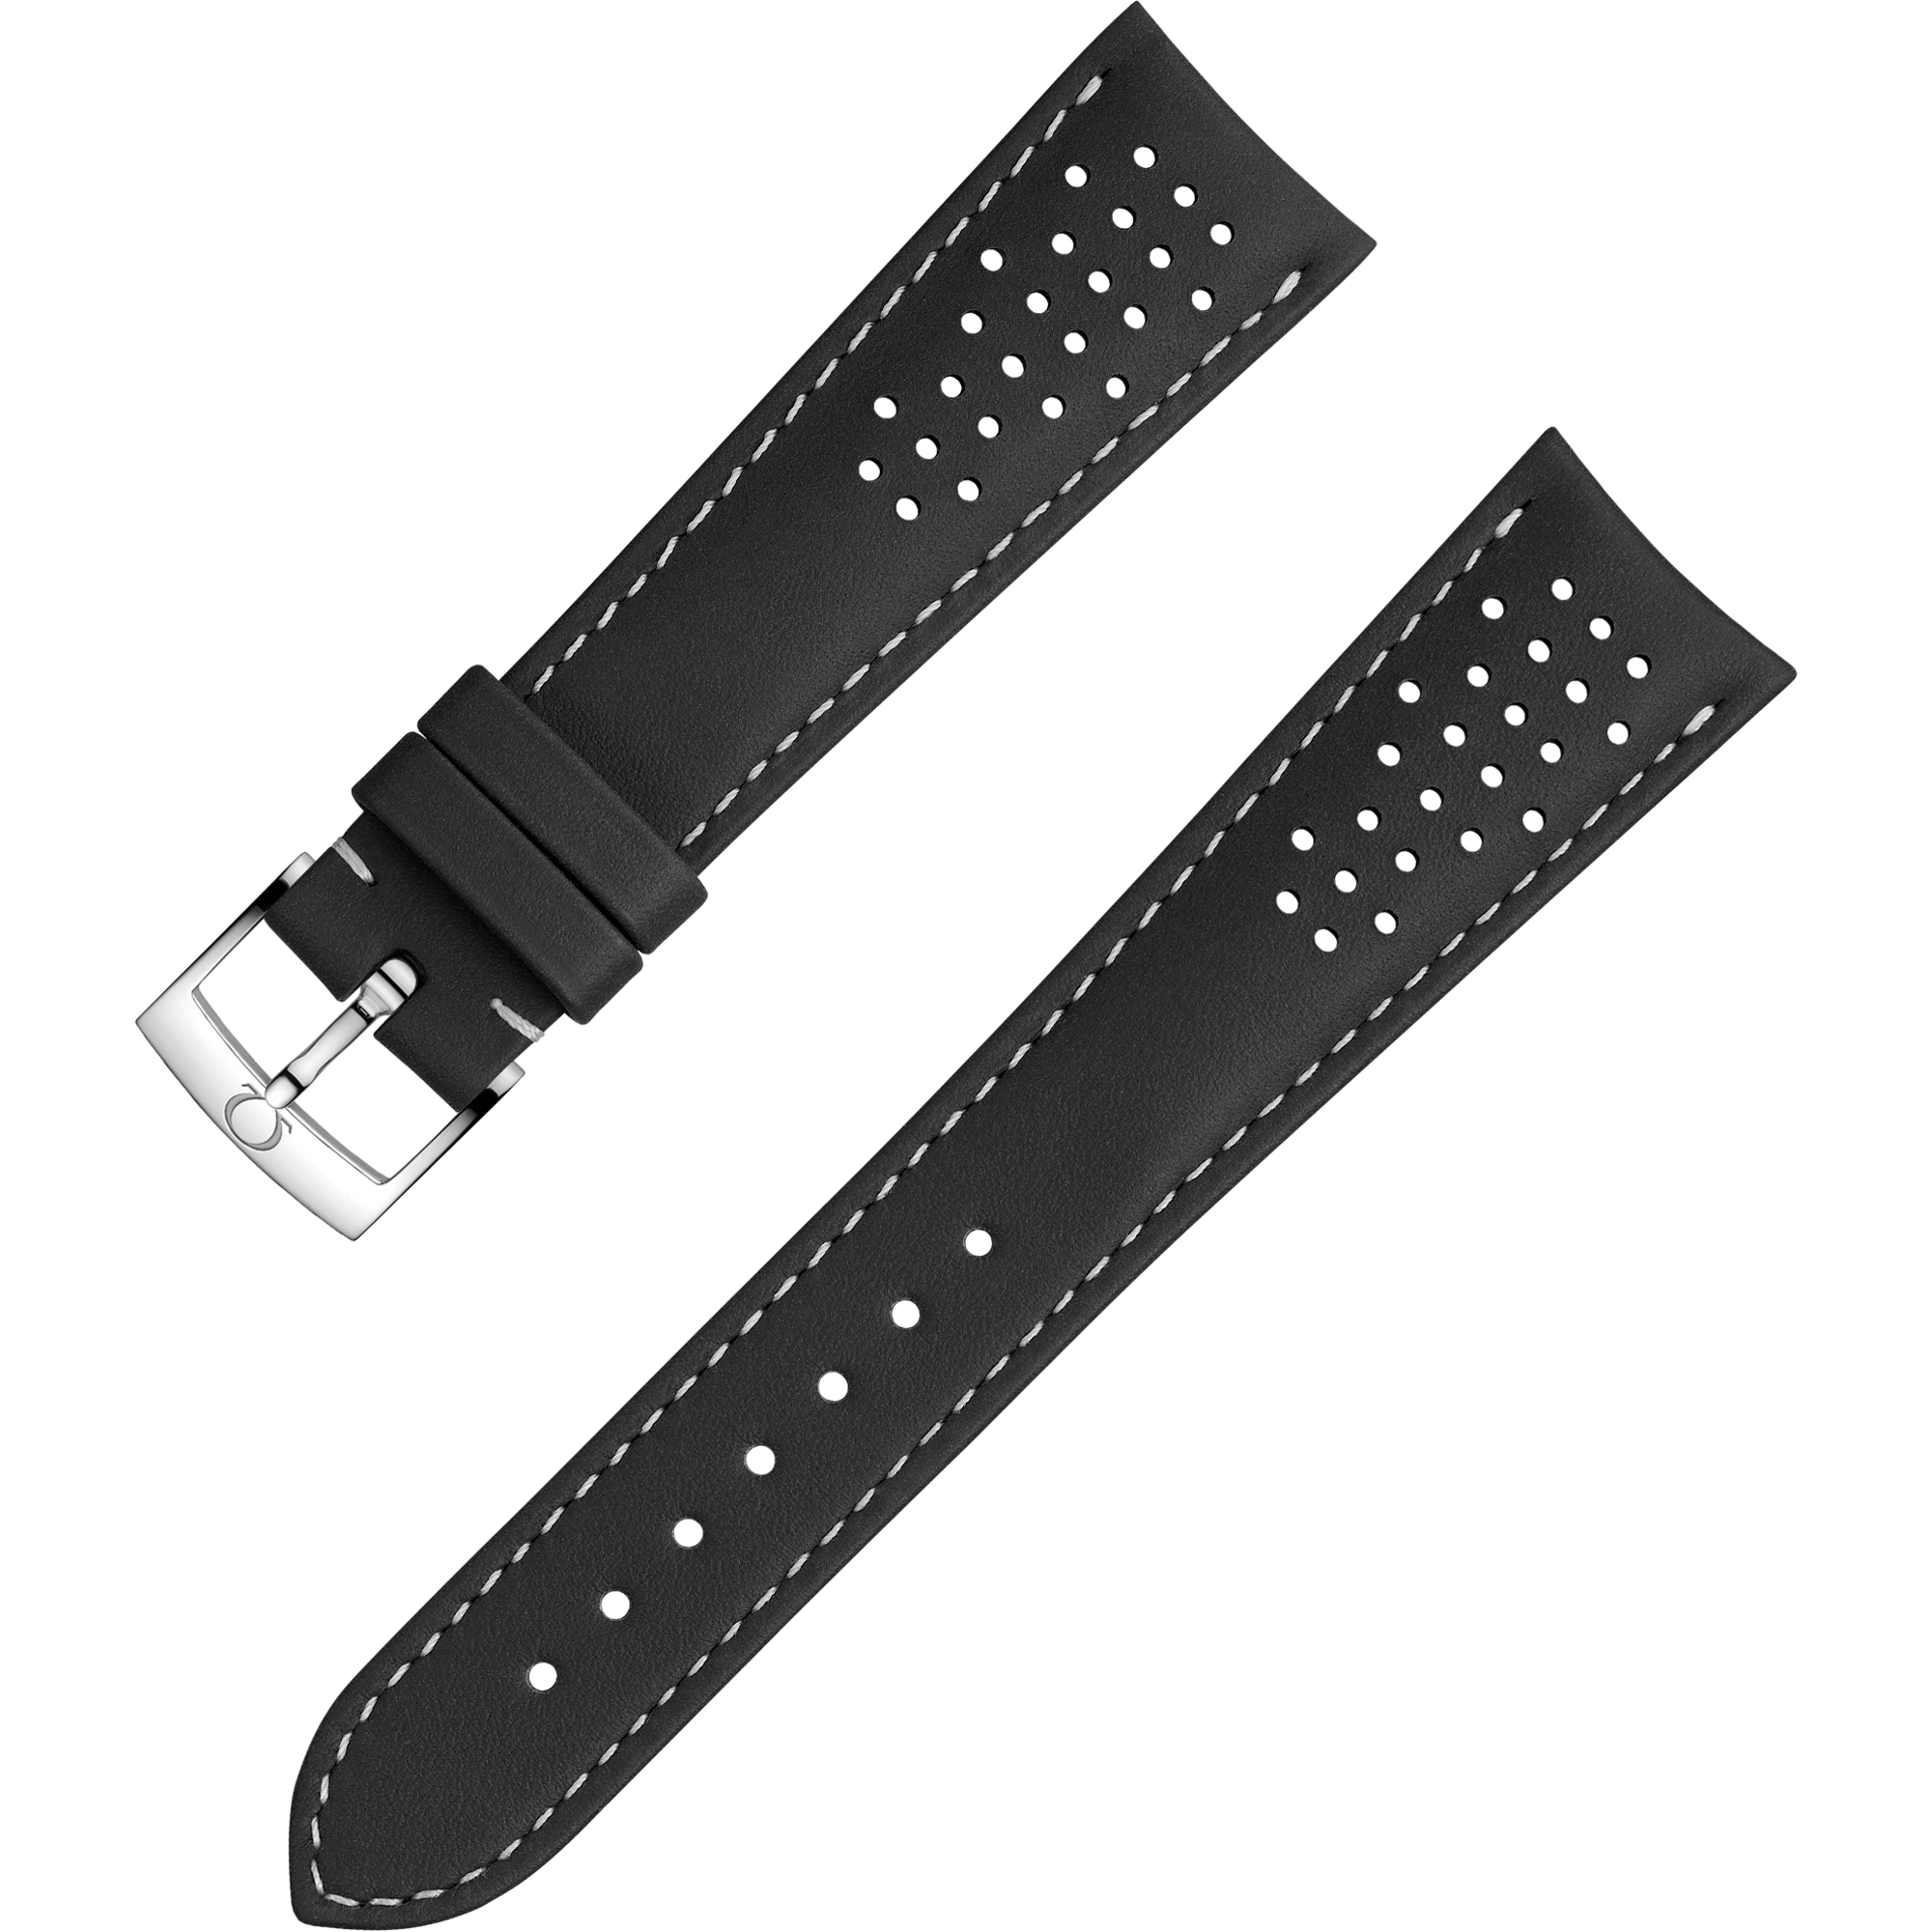 Two-piece strap - Black leather strap with pin buckle - 032CUZ010017W